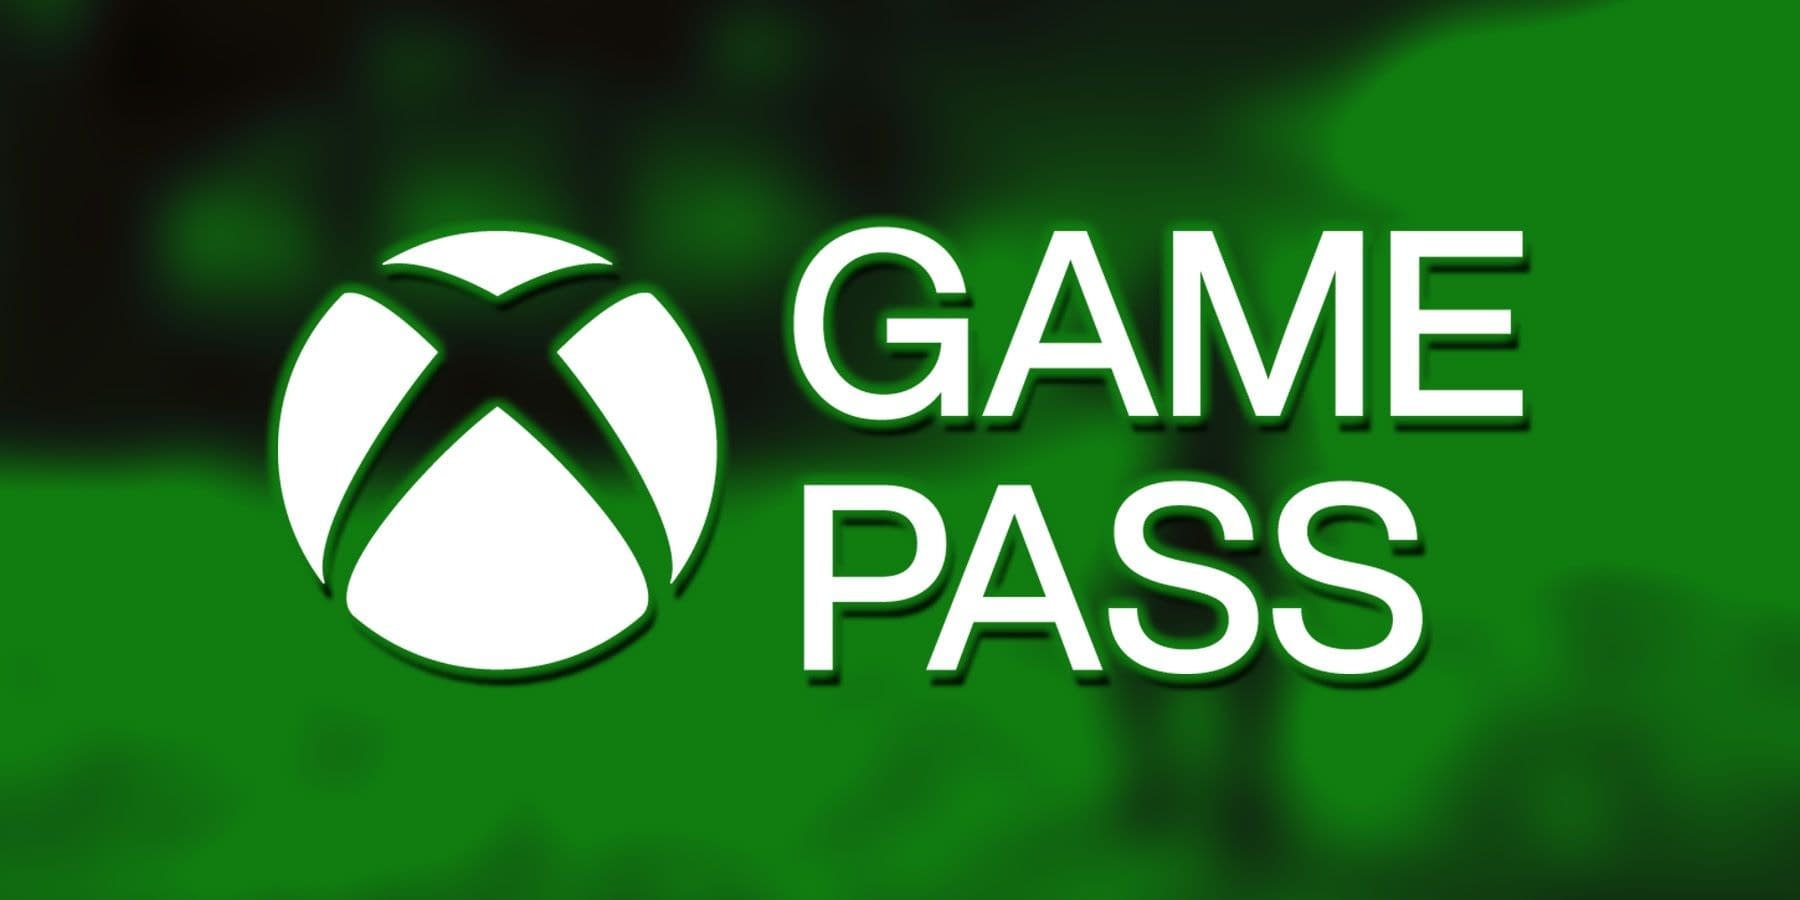 Xbox: Call of Duty Included First Party Games First Day Game Pass!